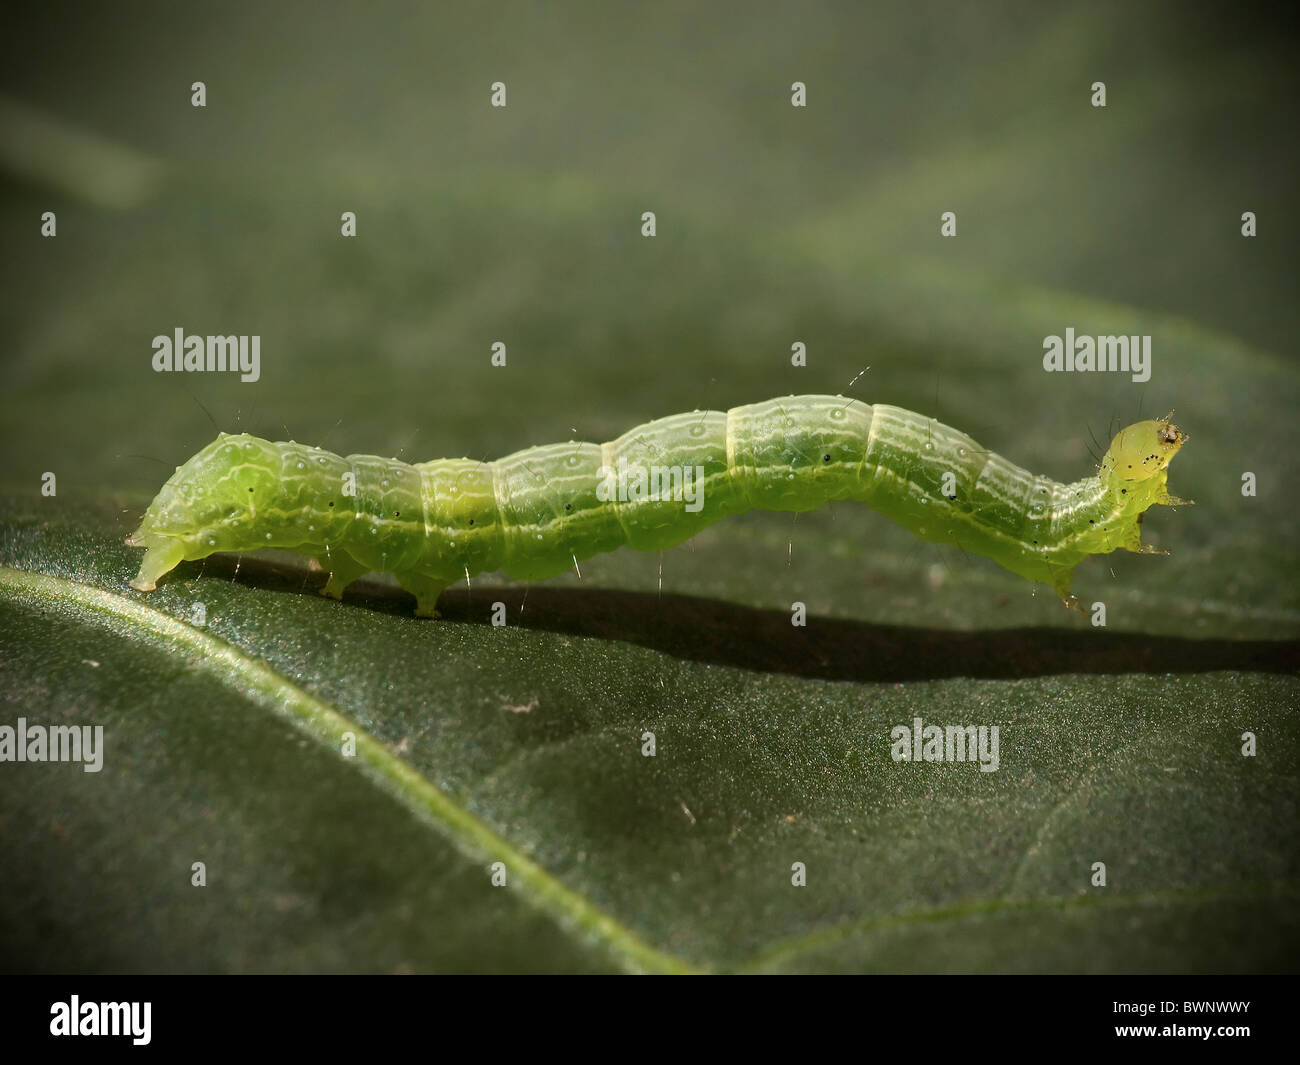 A Fat Green Caterpillar With A Shiny Black Head On A Juicy Green Leaf Stock  Photo - Download Image Now - iStock